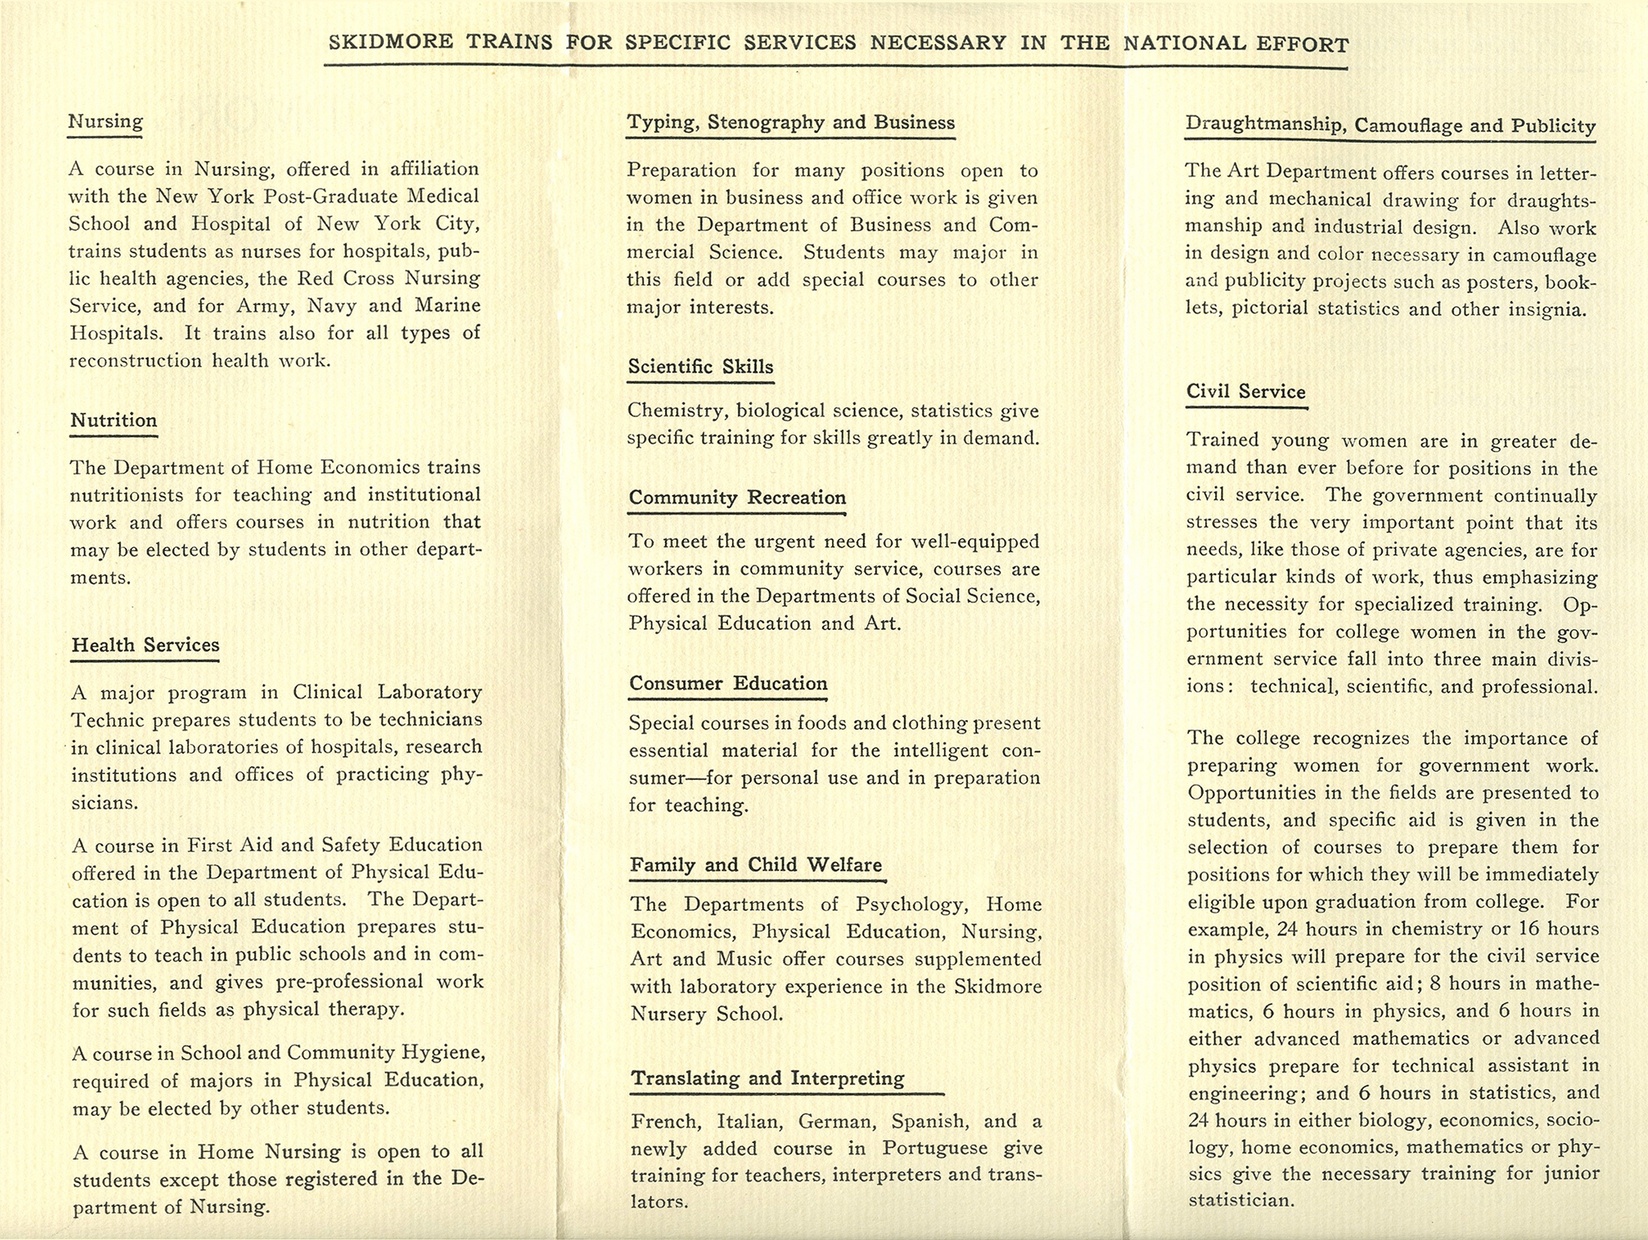 A pale yellow brochure with crease marks divides the page into three sections. “SKIDMORE TRAINS FOR SPECIFIC SERVICES NECESSARY IN THE NATIONAL EFFORT” is written on top-center with each part accompanied by smaller text.